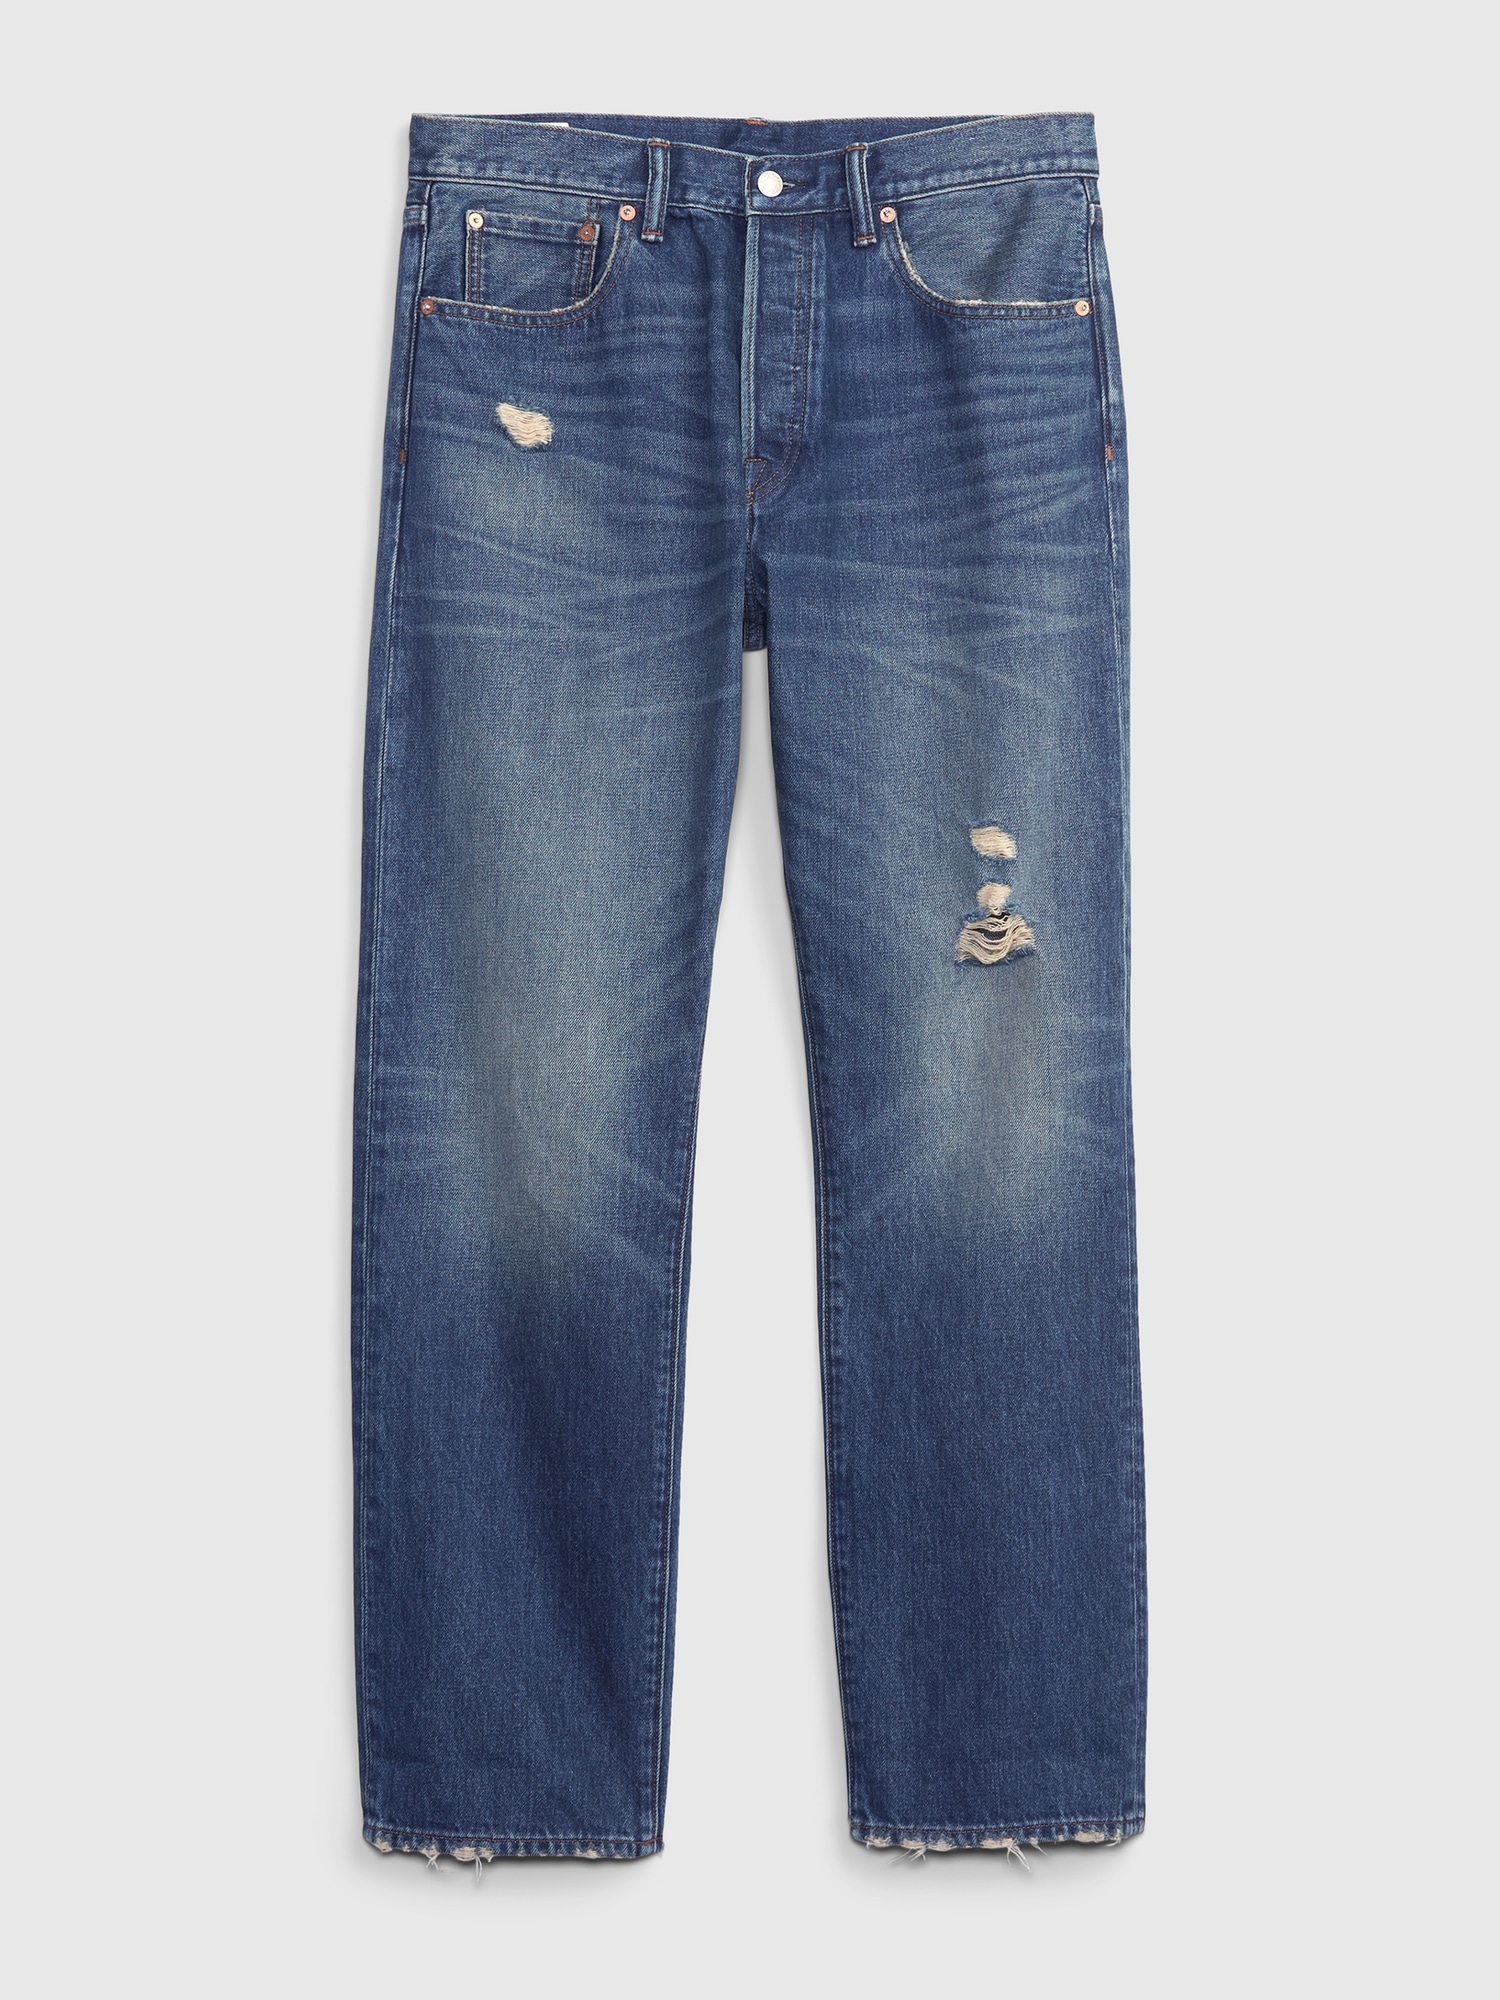 Organic Cotton Button Fly '90s Original Straight Fit Jeans | Gap